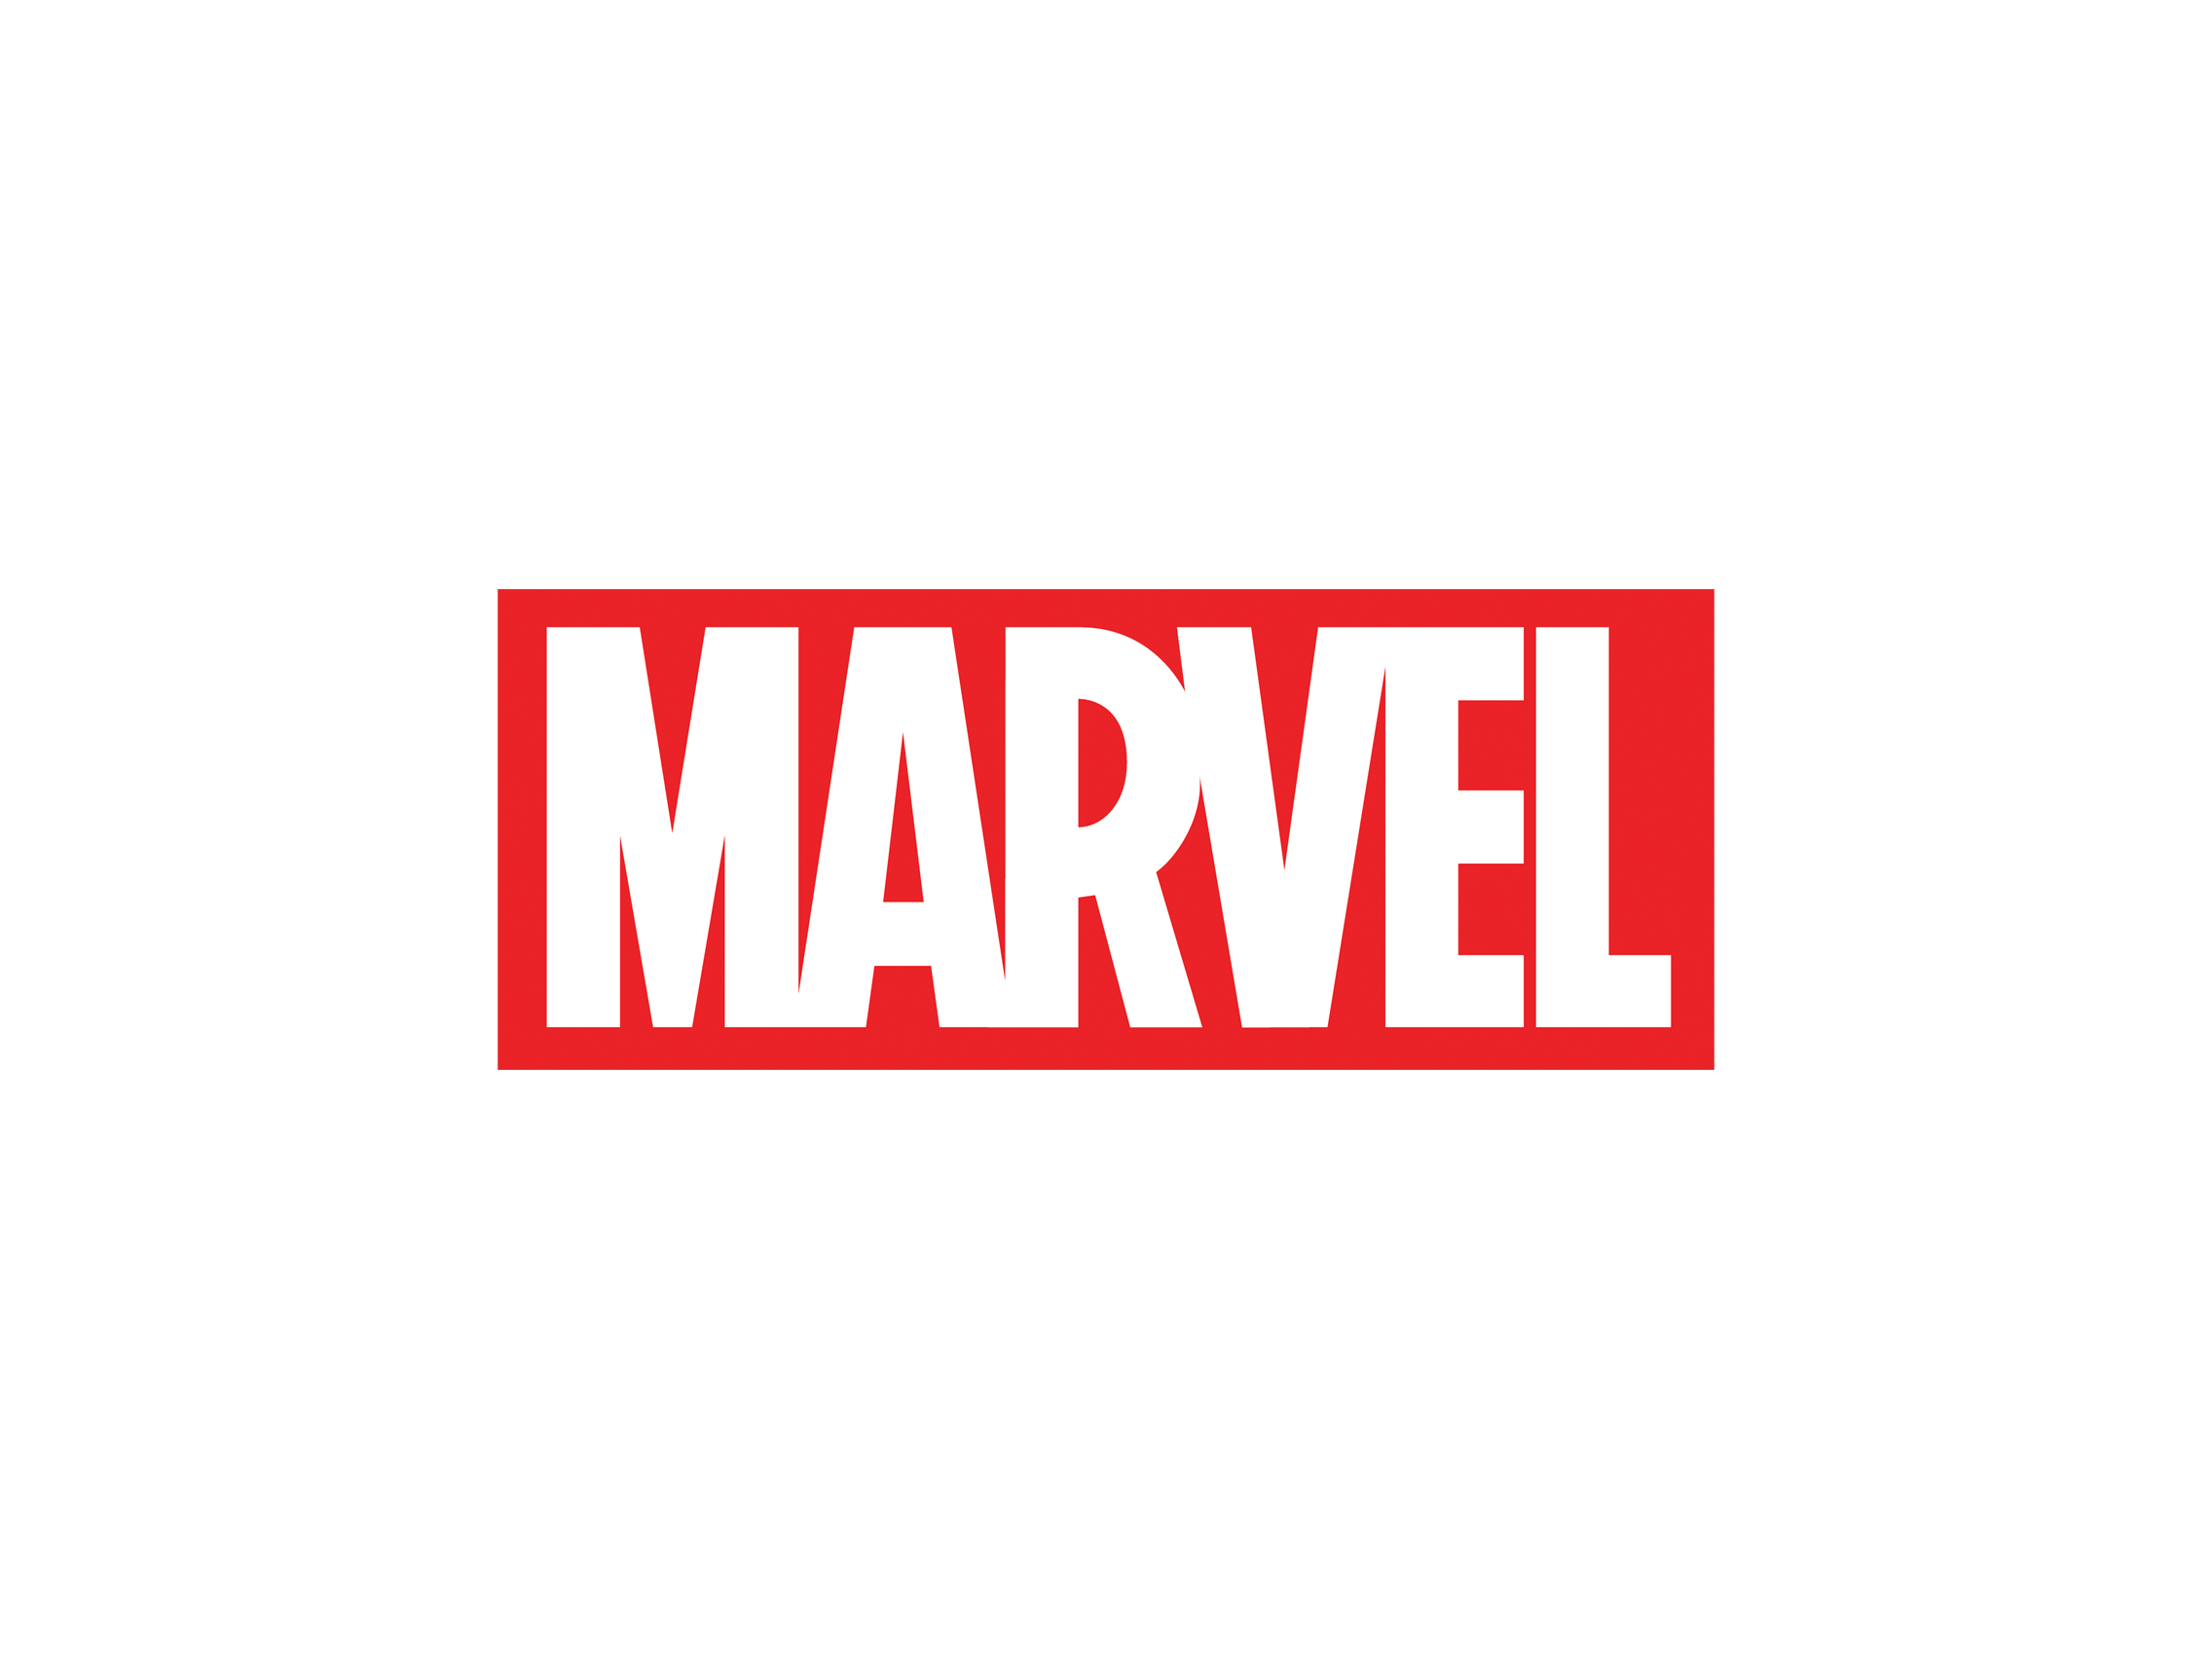 Marvel series with FOX and FX